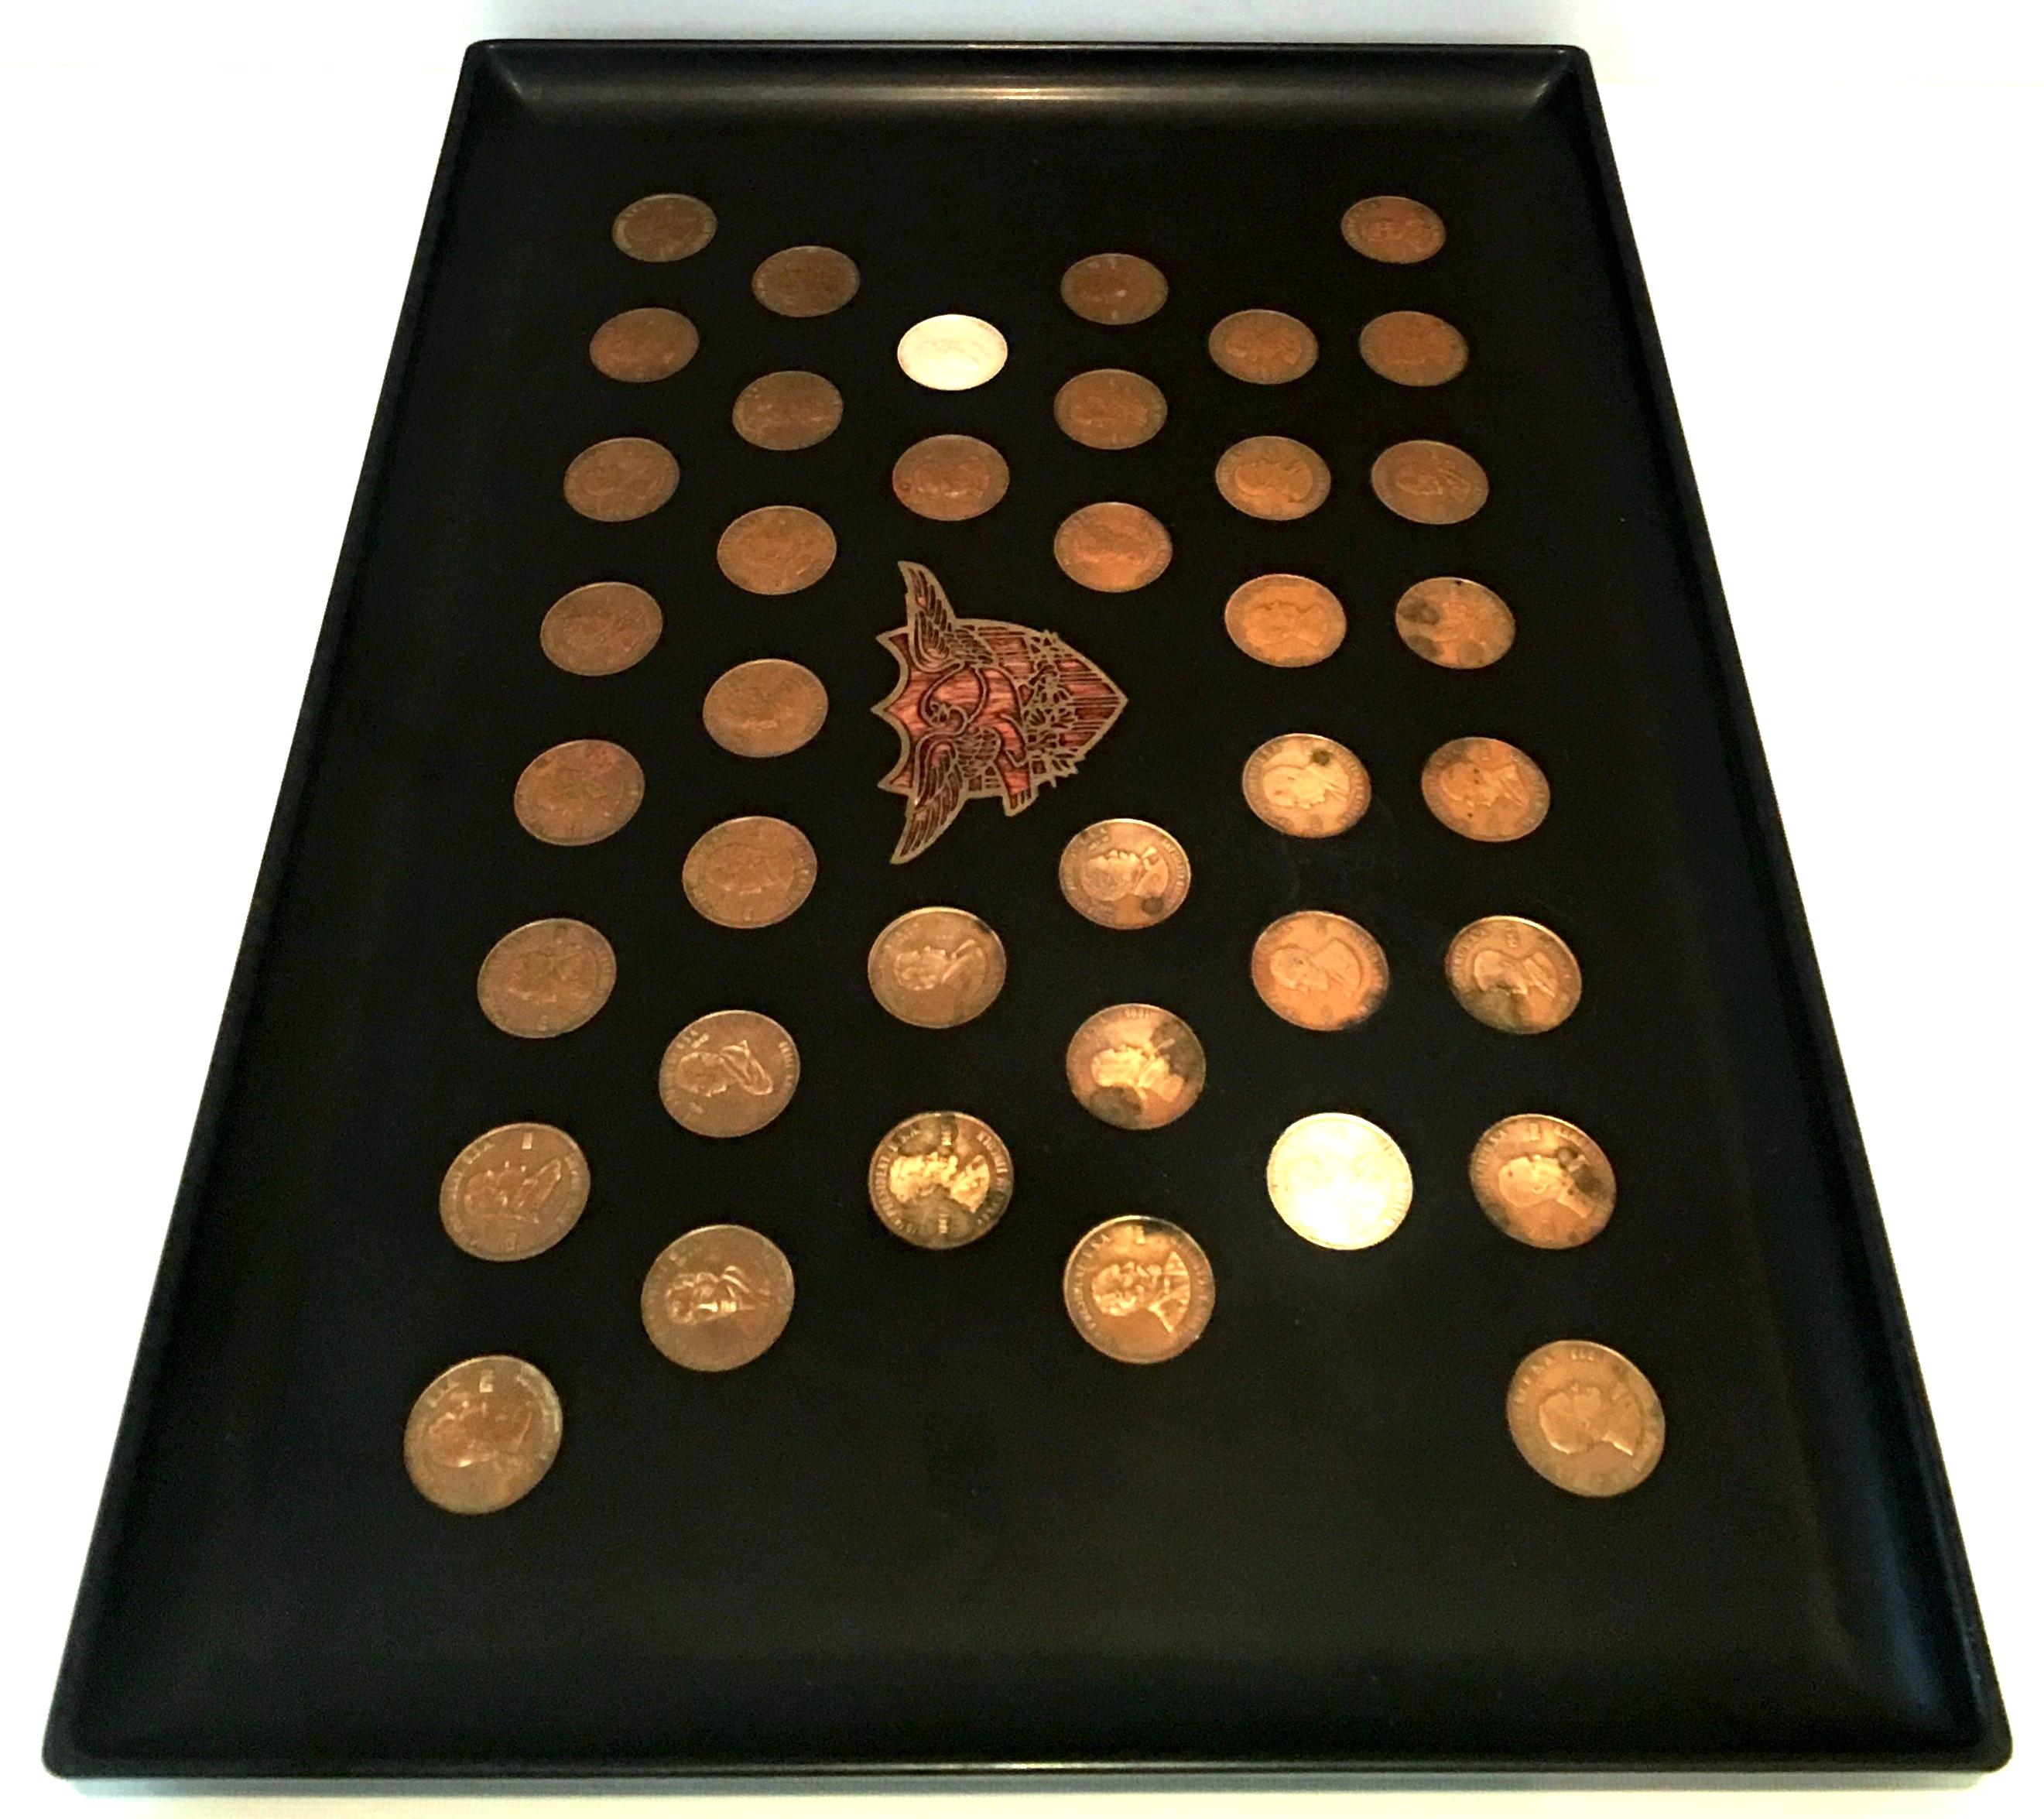 Mid-20th Century Large Black Lacquer Presidential Coin Inlay Tray by Couroc In Good Condition For Sale In West Palm Beach, FL